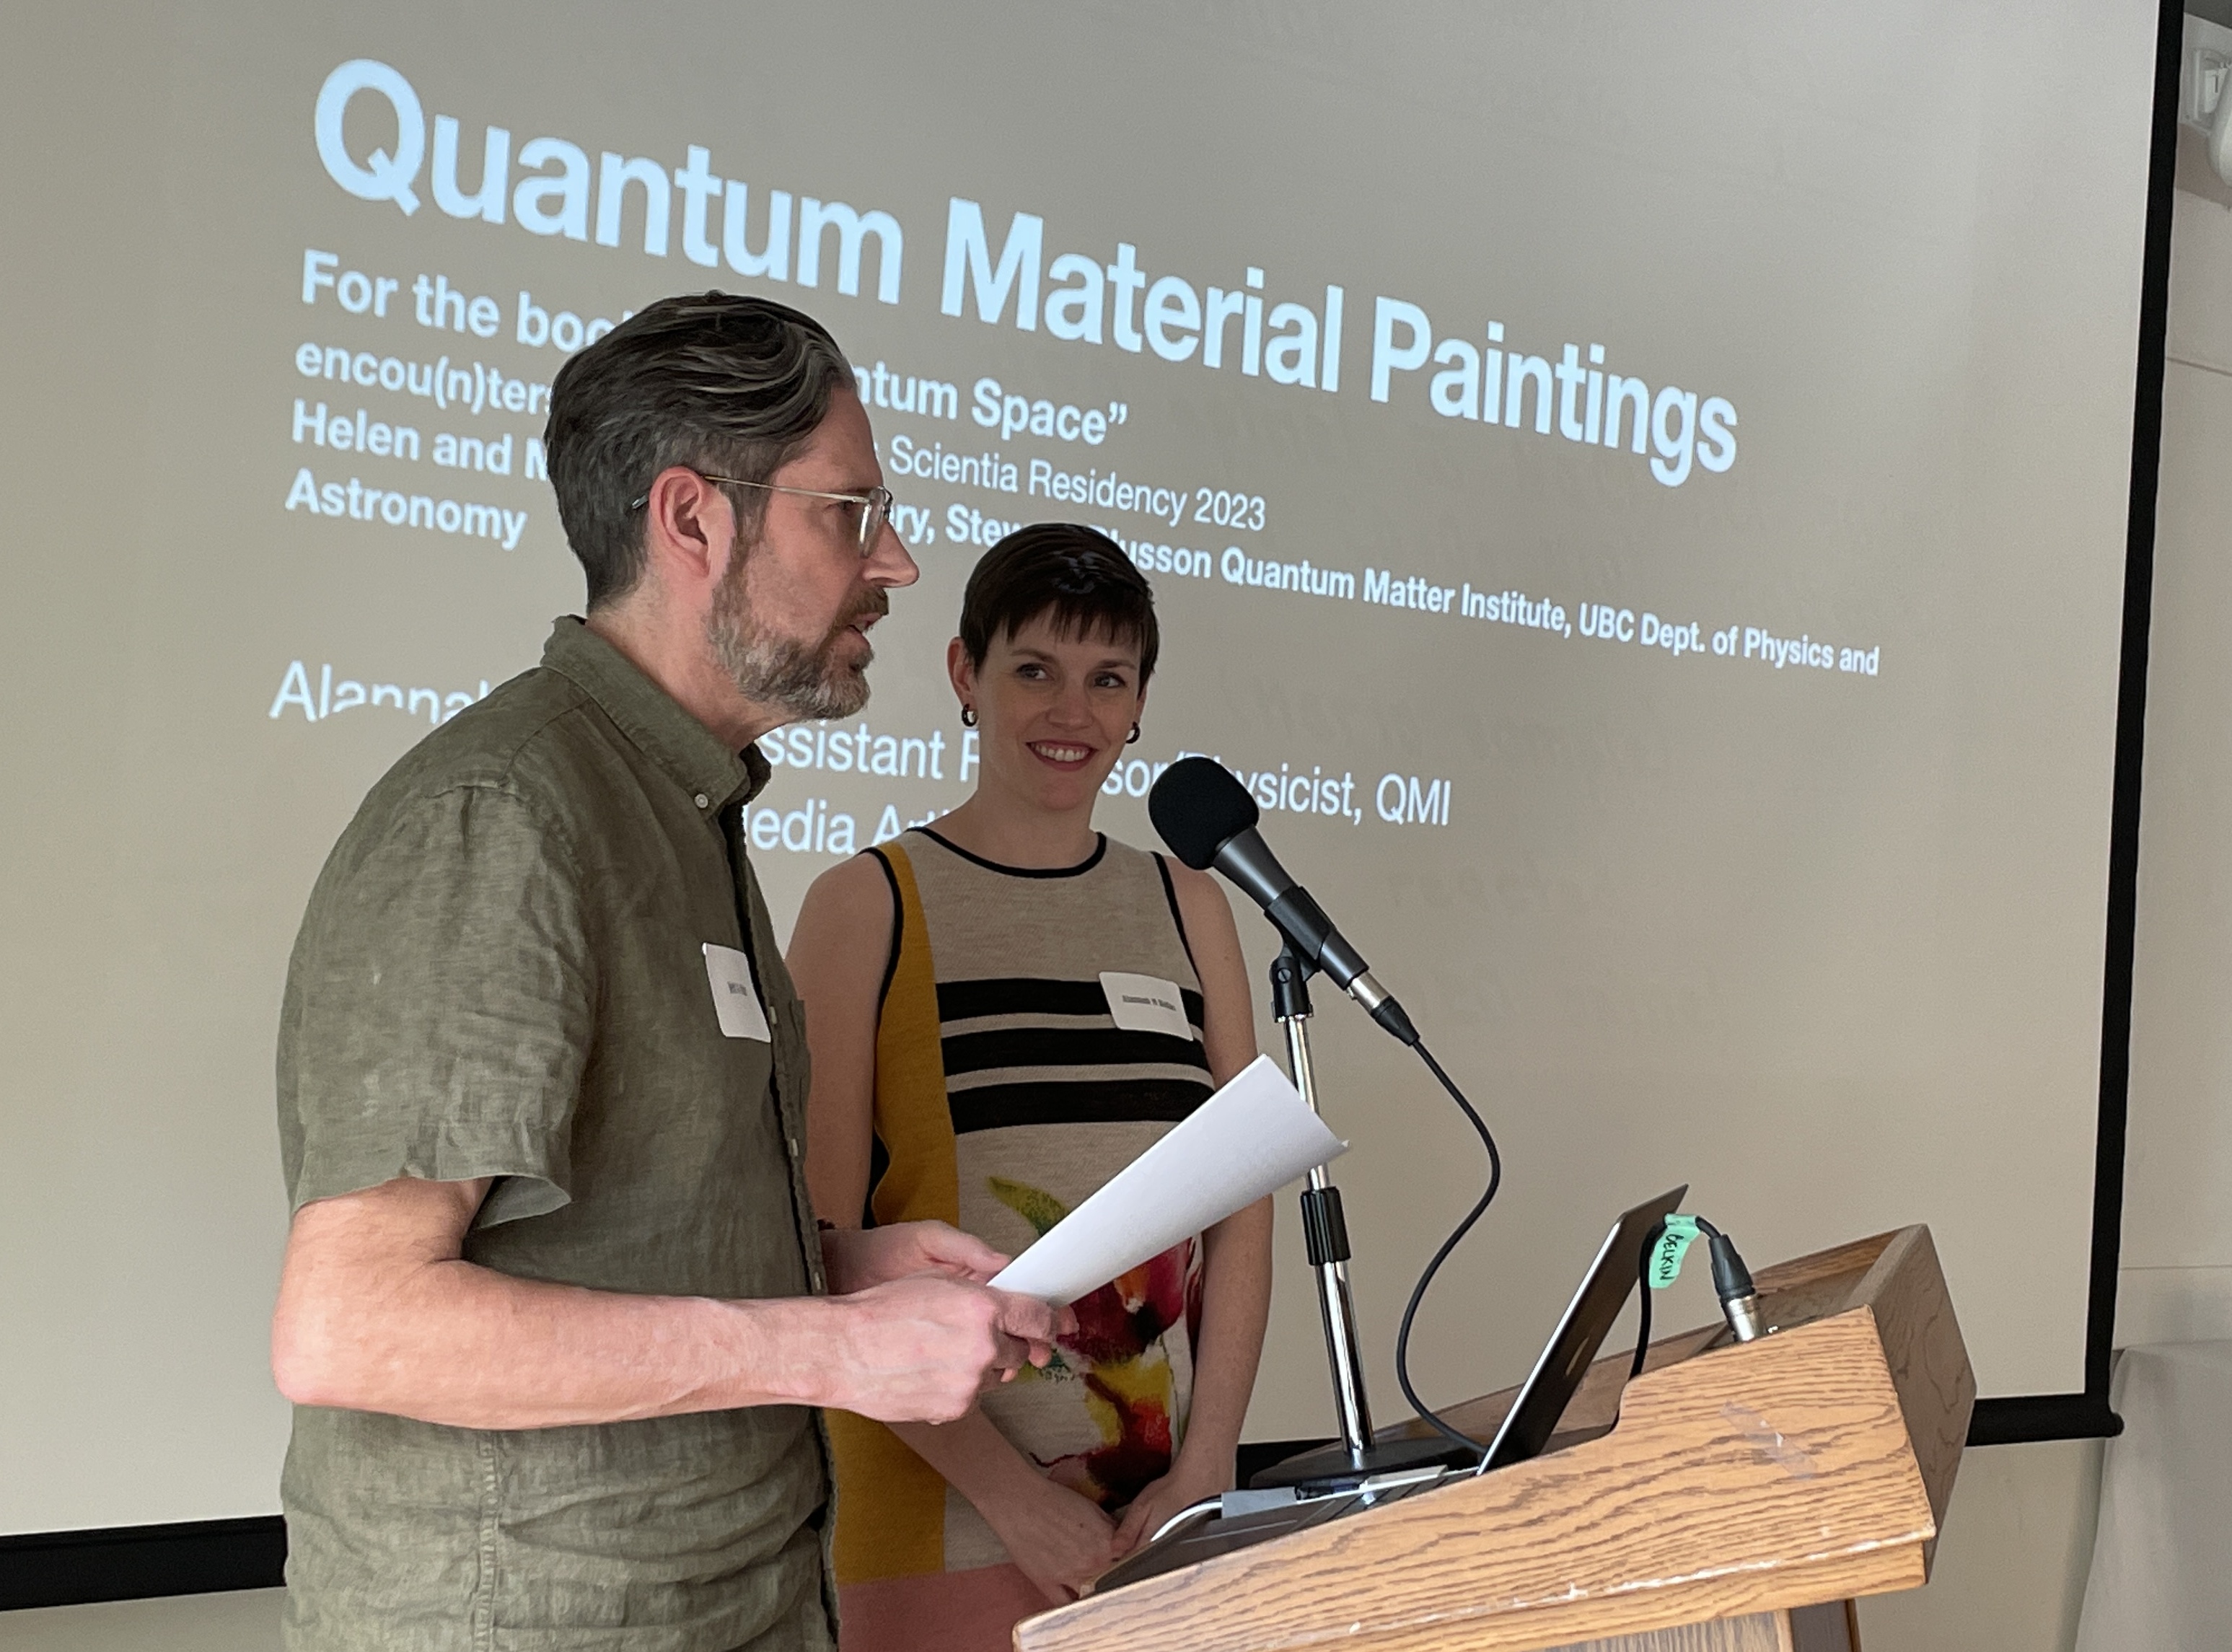 Artist and scientist give a collaborative talk behind a podium